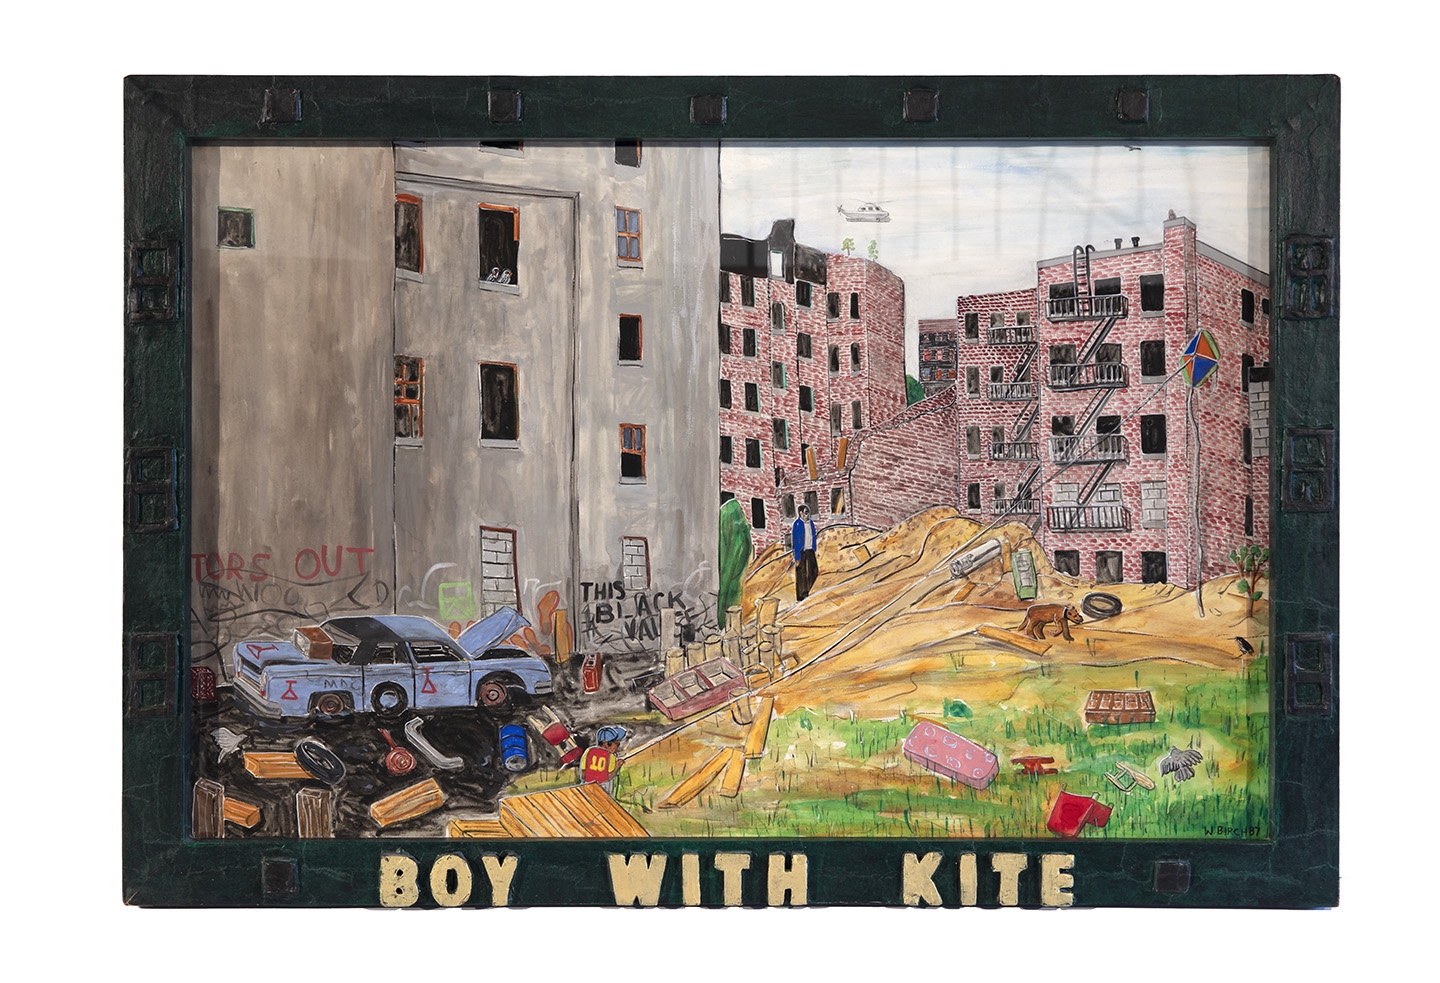 Boy With a Kite, 1987&amp;nbsp;
Pencil graphite and gouache on paper with acrylic painted paper mache frame&amp;nbsp;
30.25 x 44.25 x 1.5 inches